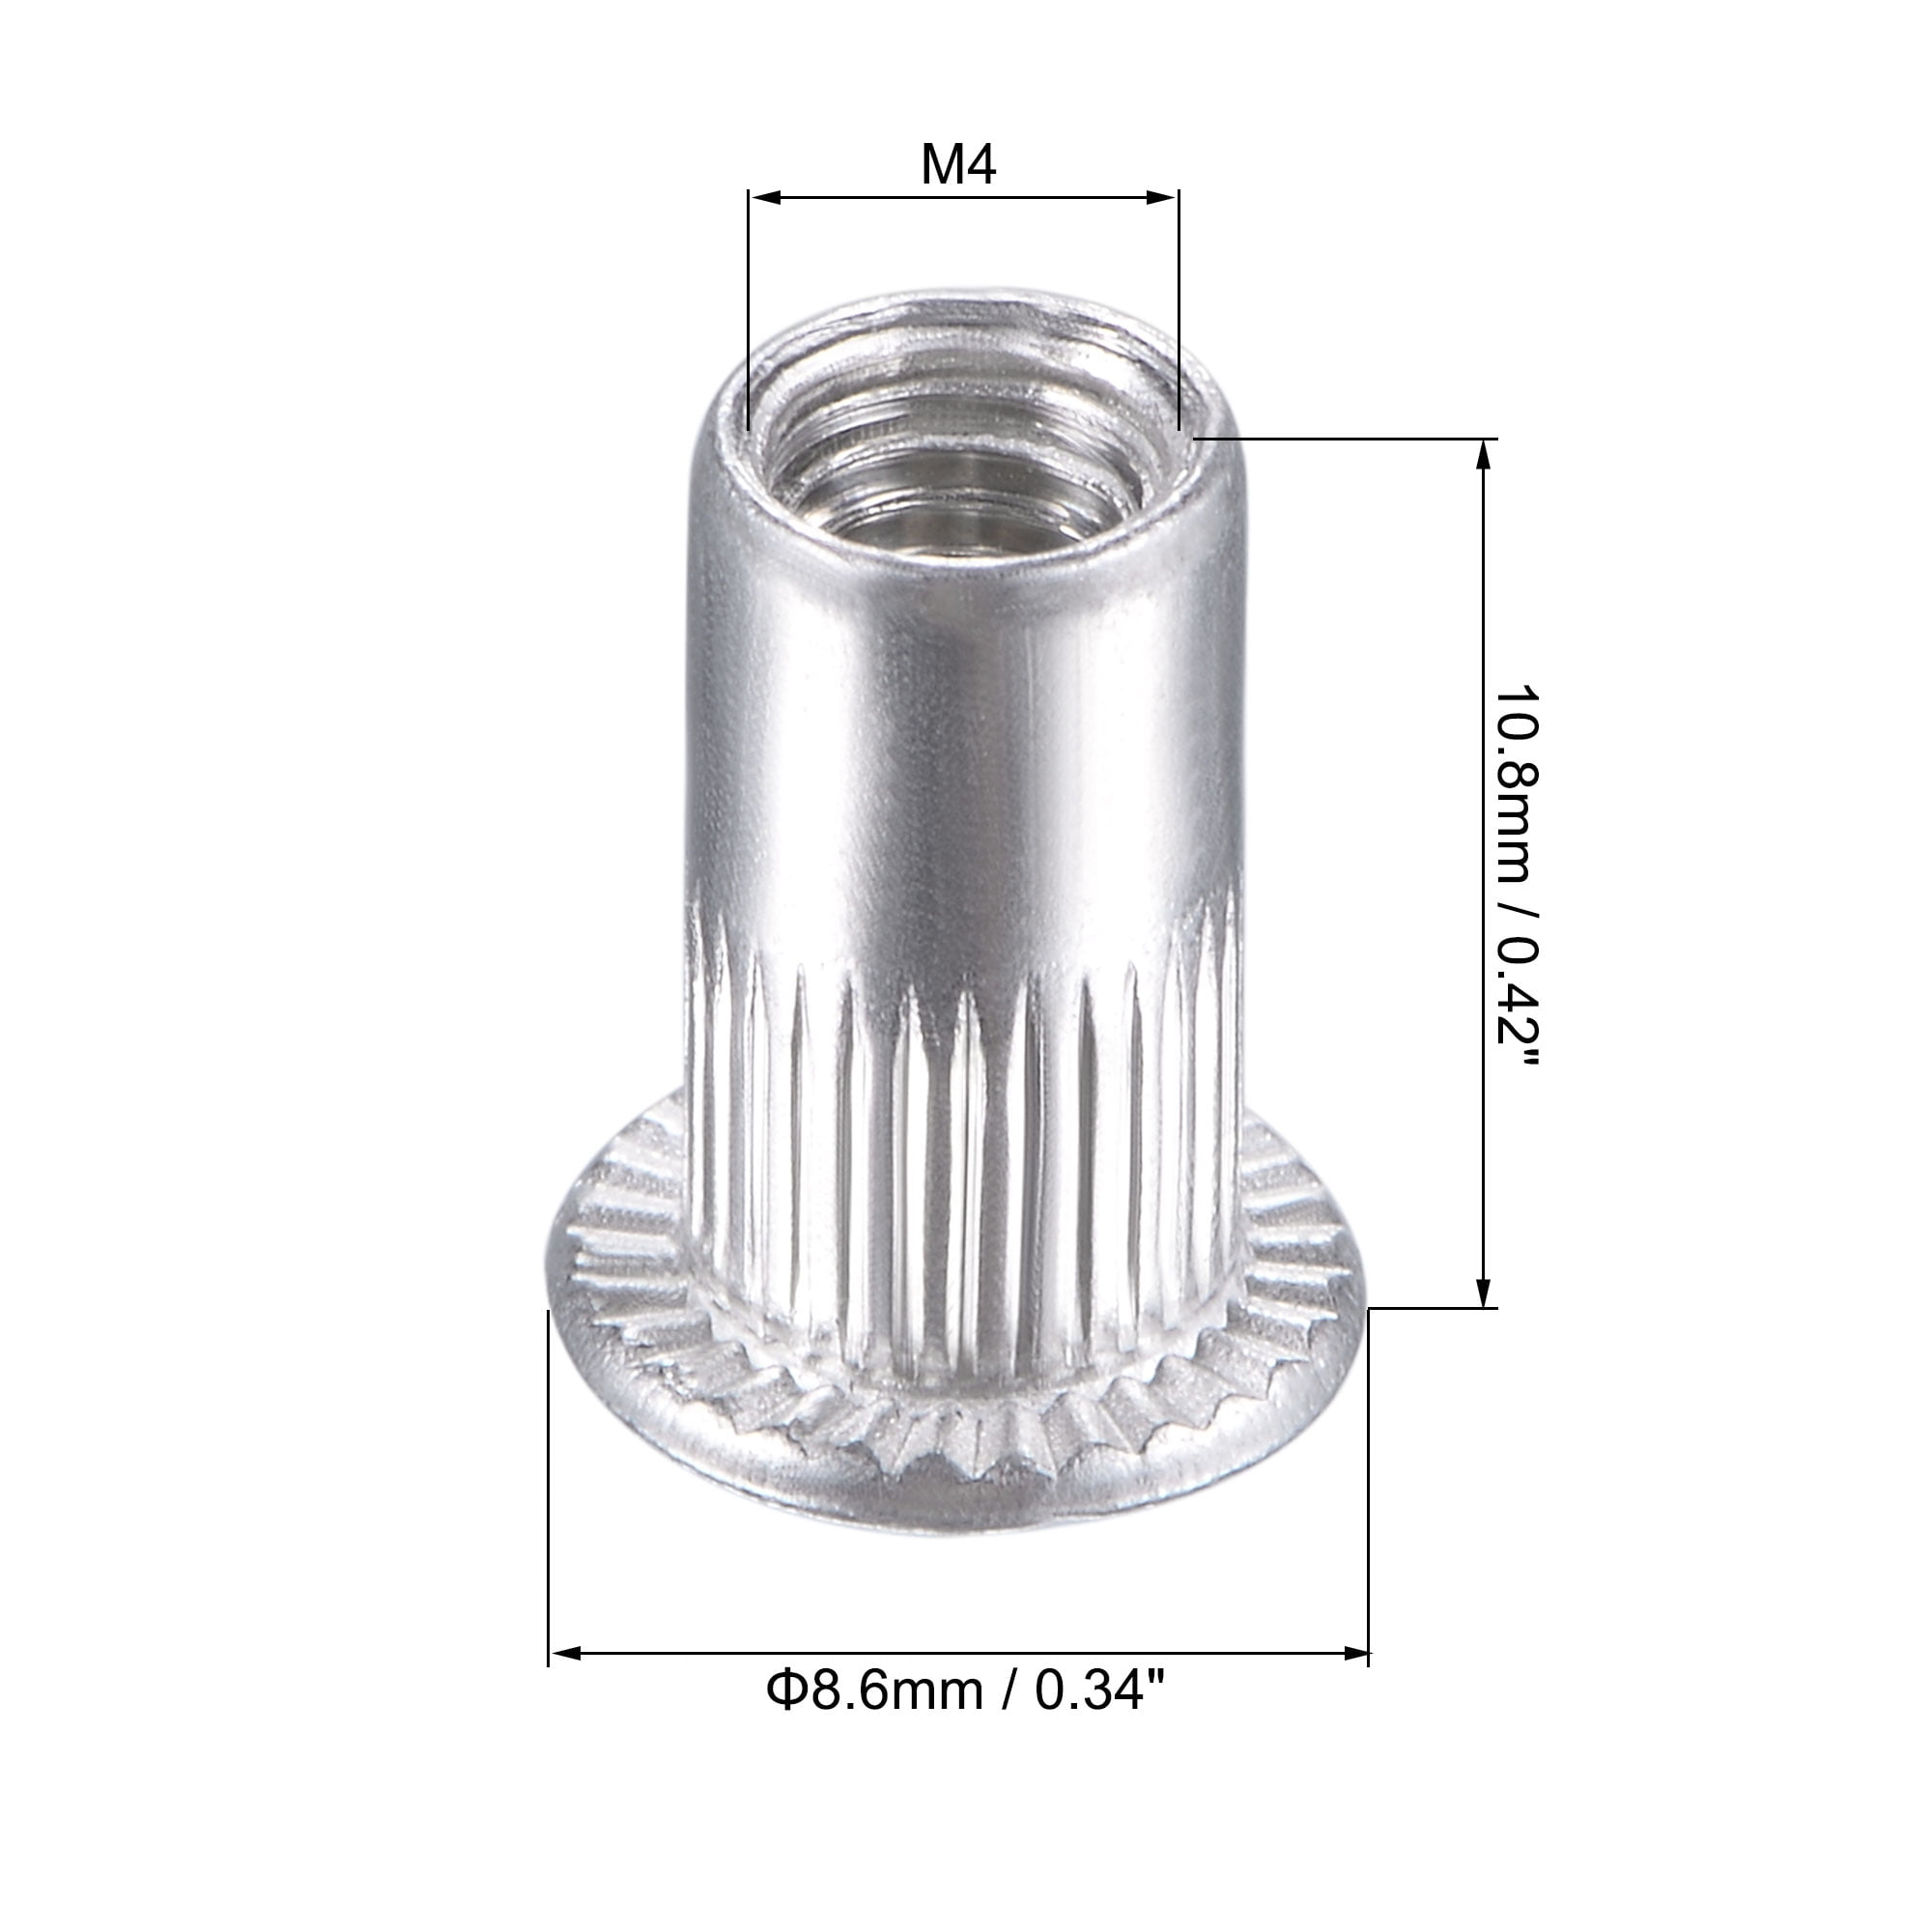 Metric A2 Stainless Steel Knurled Reduced Head Riv Nuts 